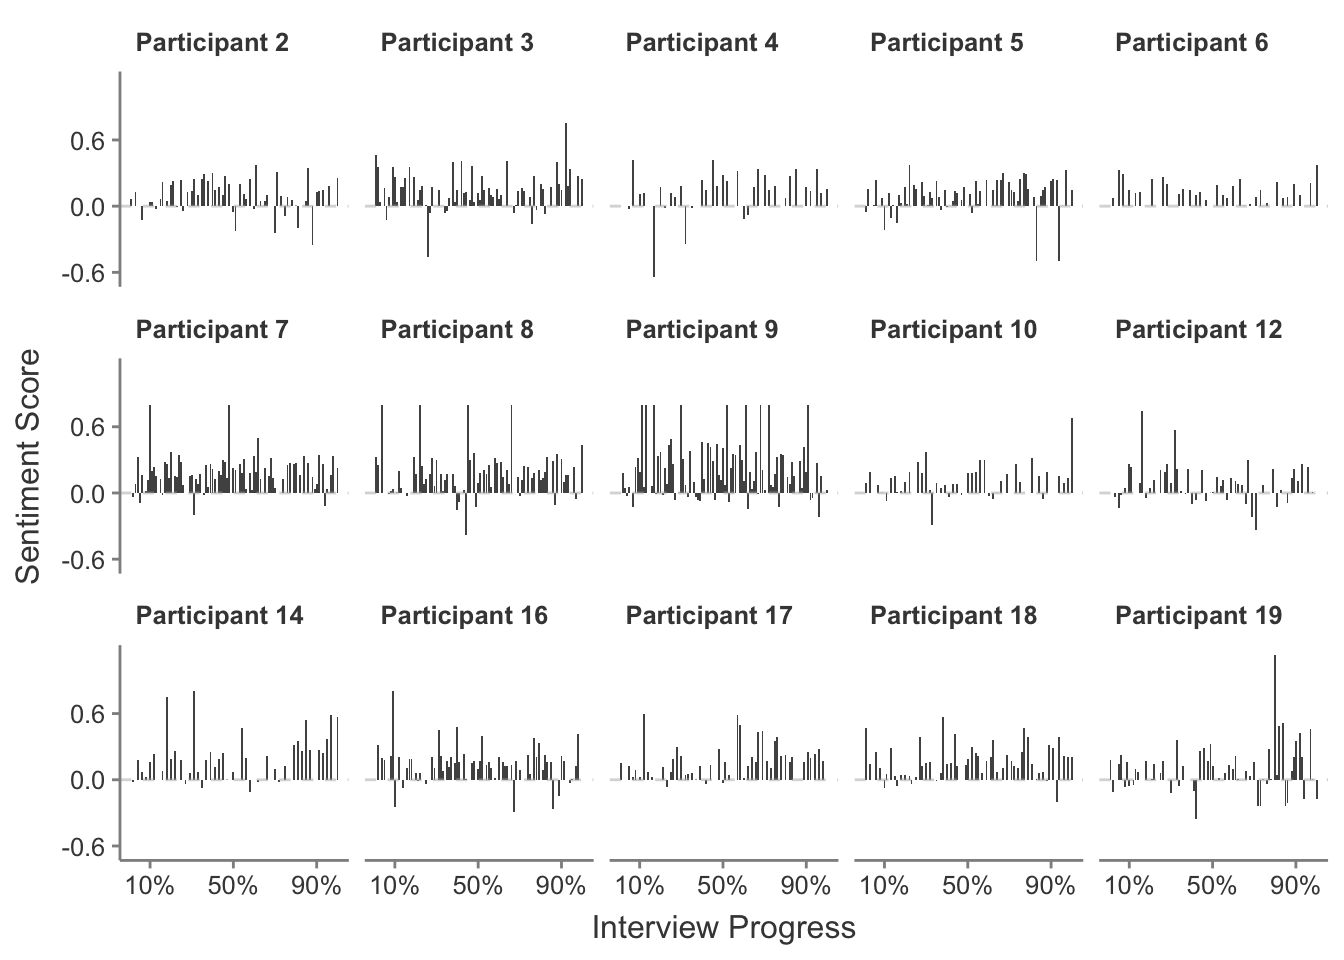 Sentiment scores for each response given by a participant in their interview.